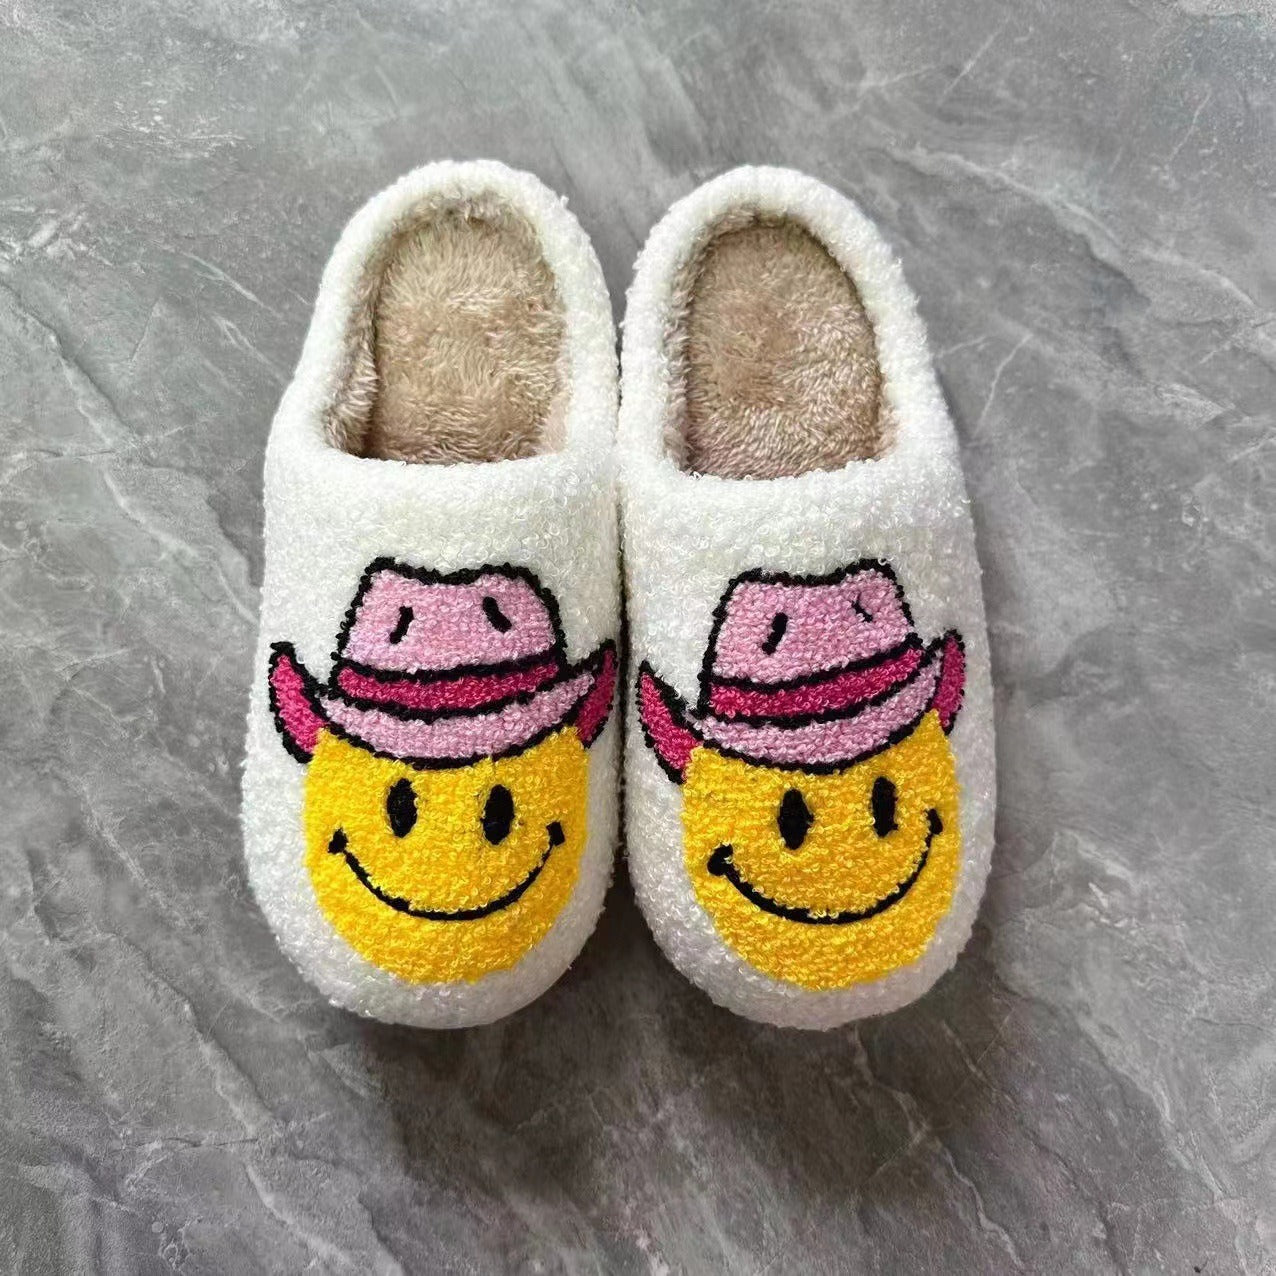 Denim smiling face pattern indoor cotton slippers for men and women plush